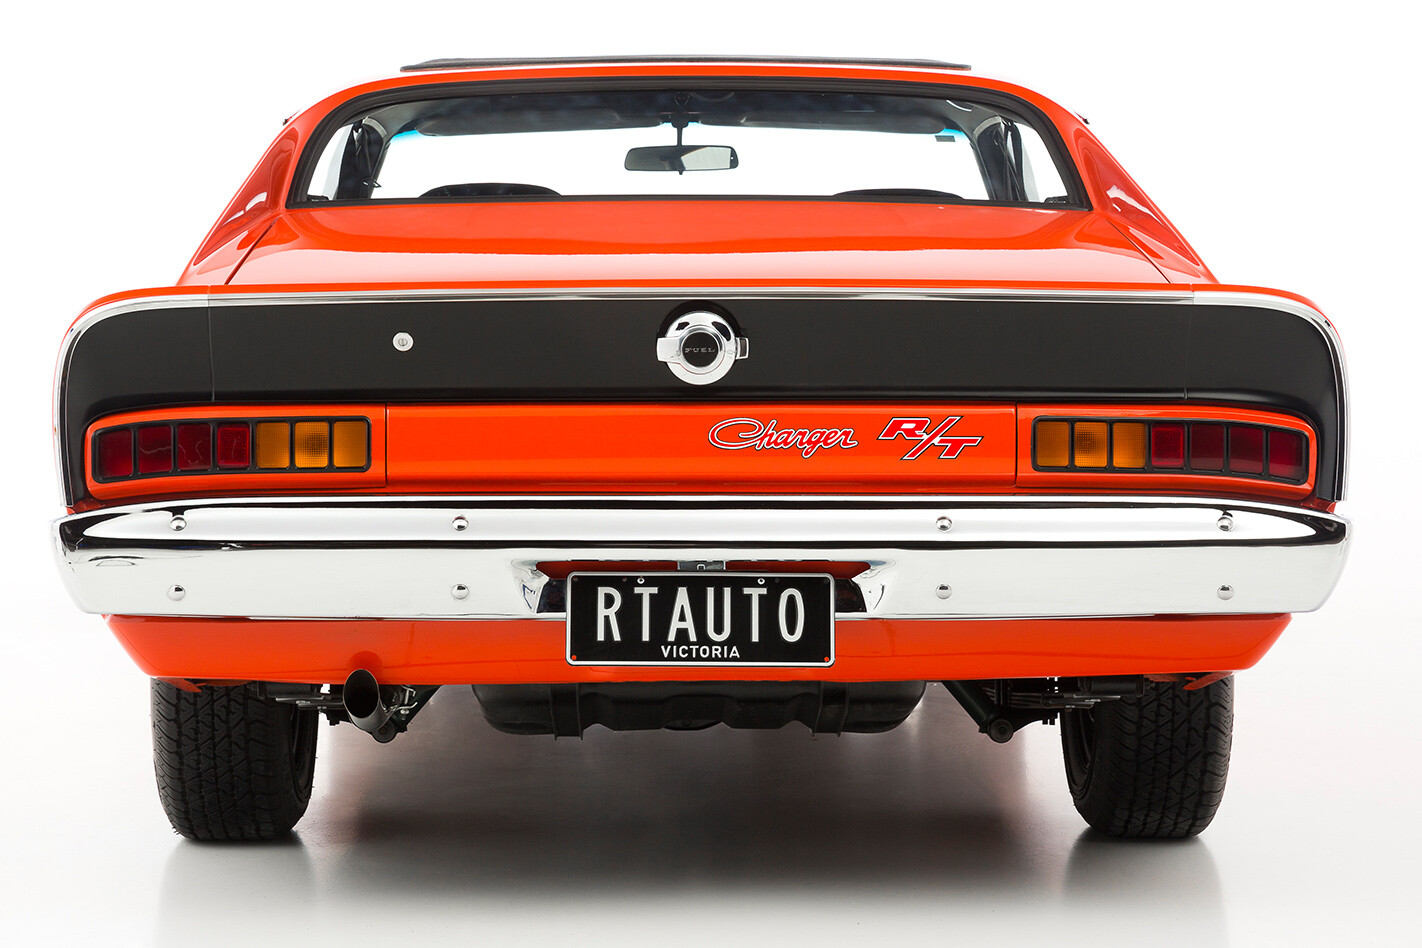 Valiant Charger rear view